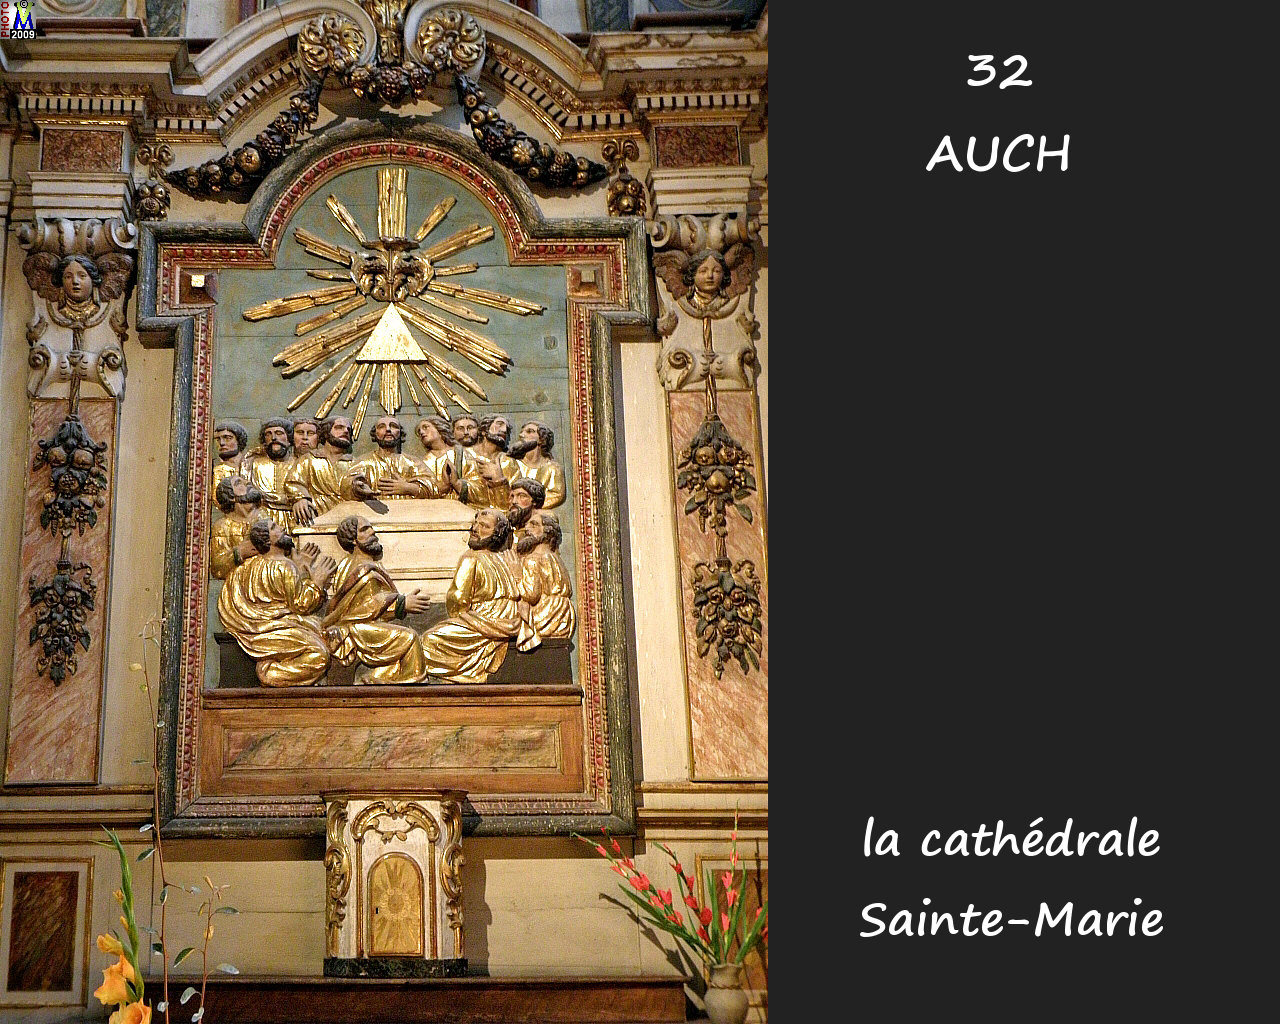 32AUCH_cathedrale_252.jpg